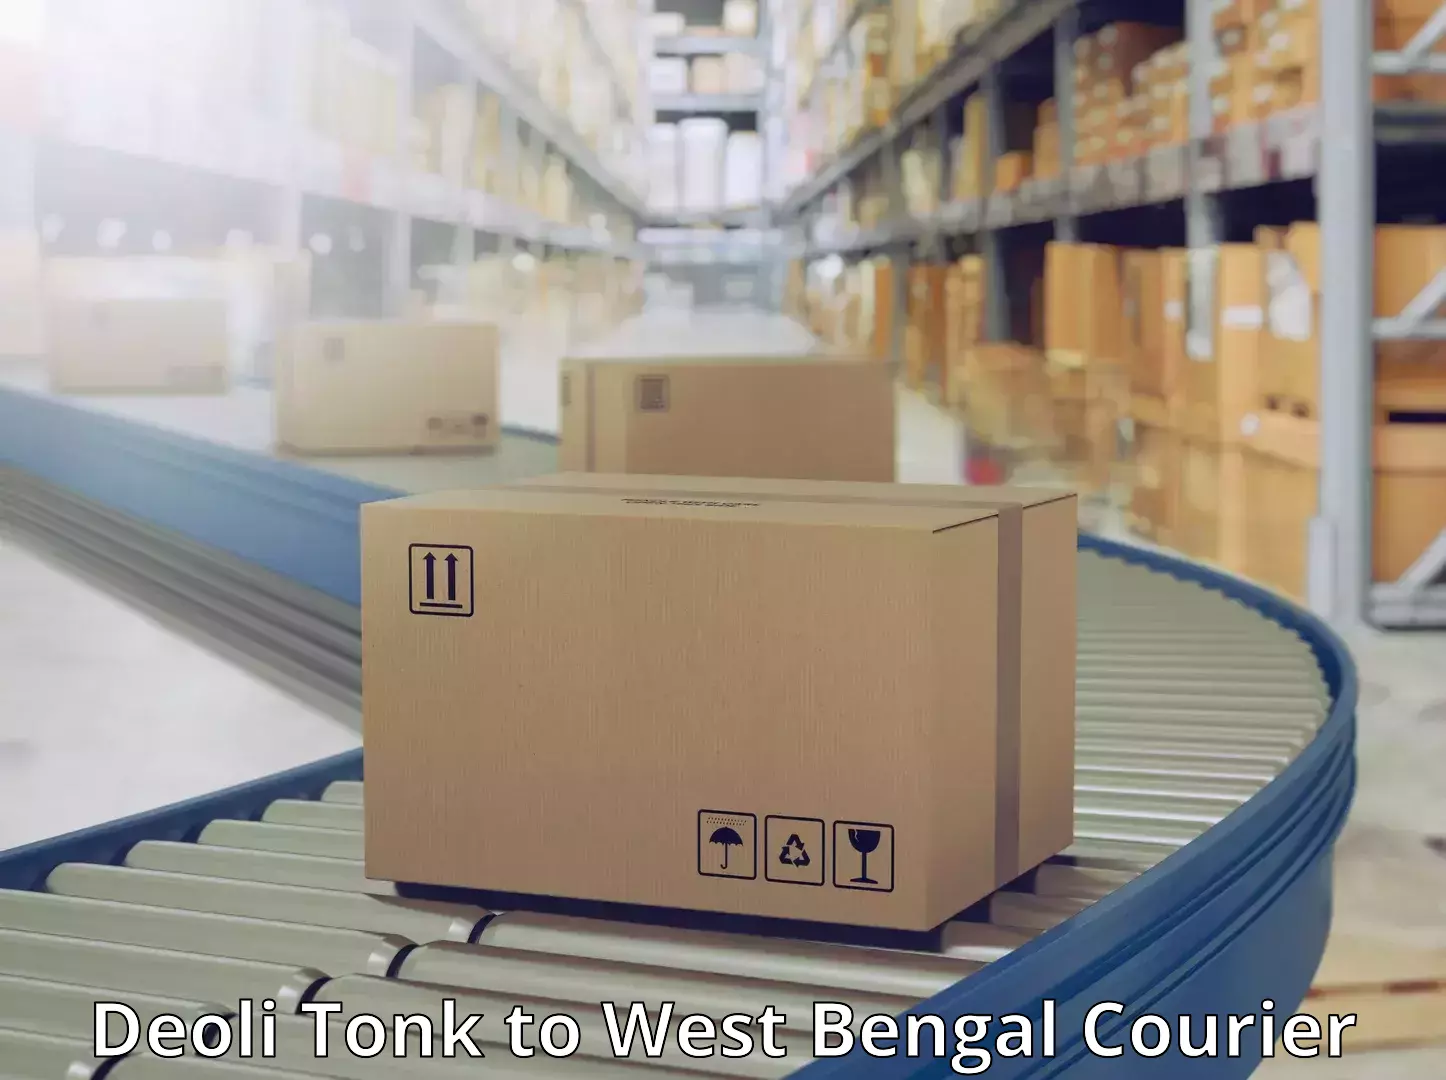 Express package handling in Deoli Tonk to Mouza Sibpur